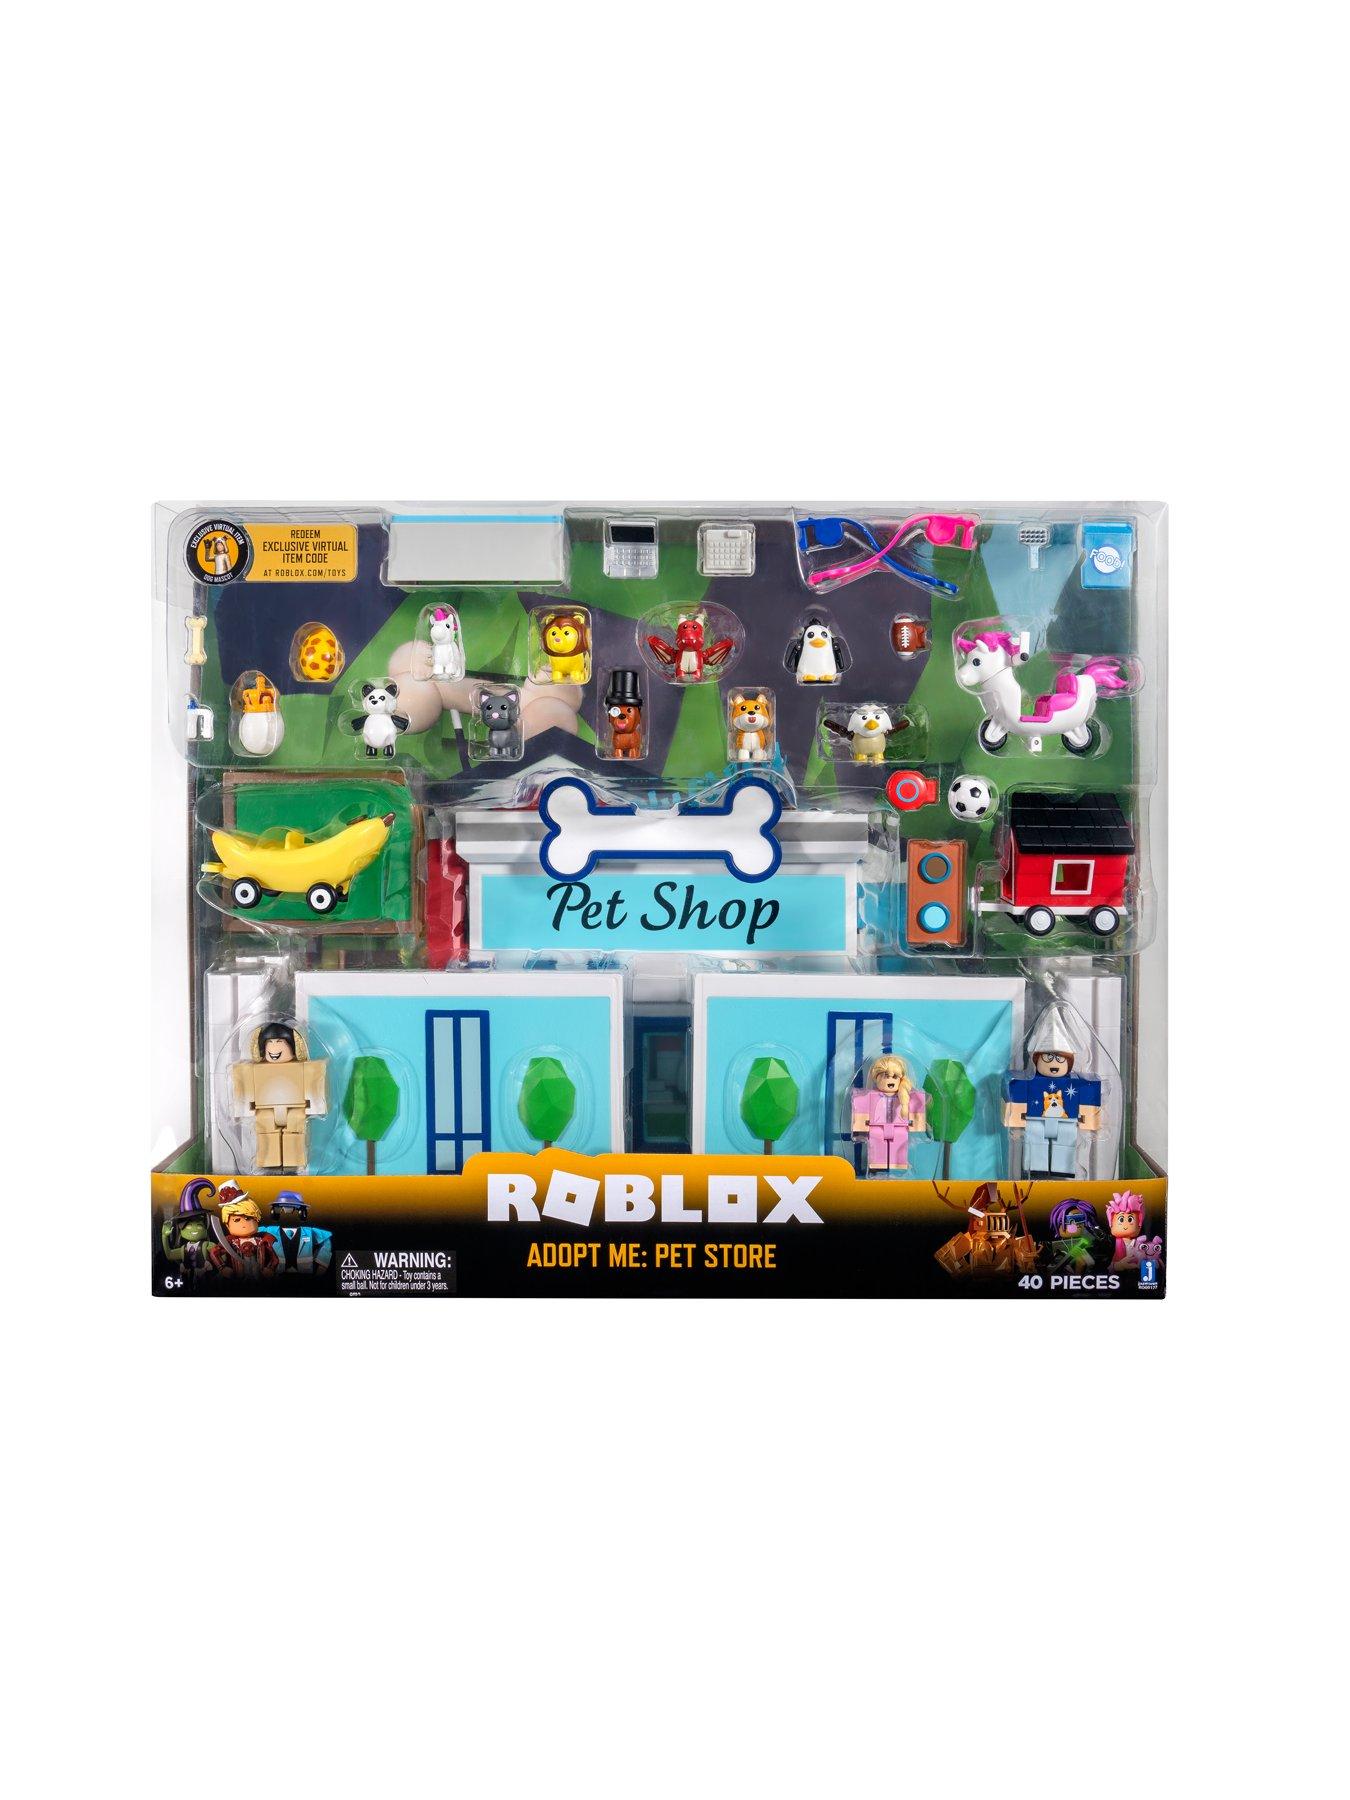 Roblox Celebrity Adopt Me Pet Store Deluxe Playset Wave 6 Very Co Uk - new store shop coming soon to adopt me roblox update tea news